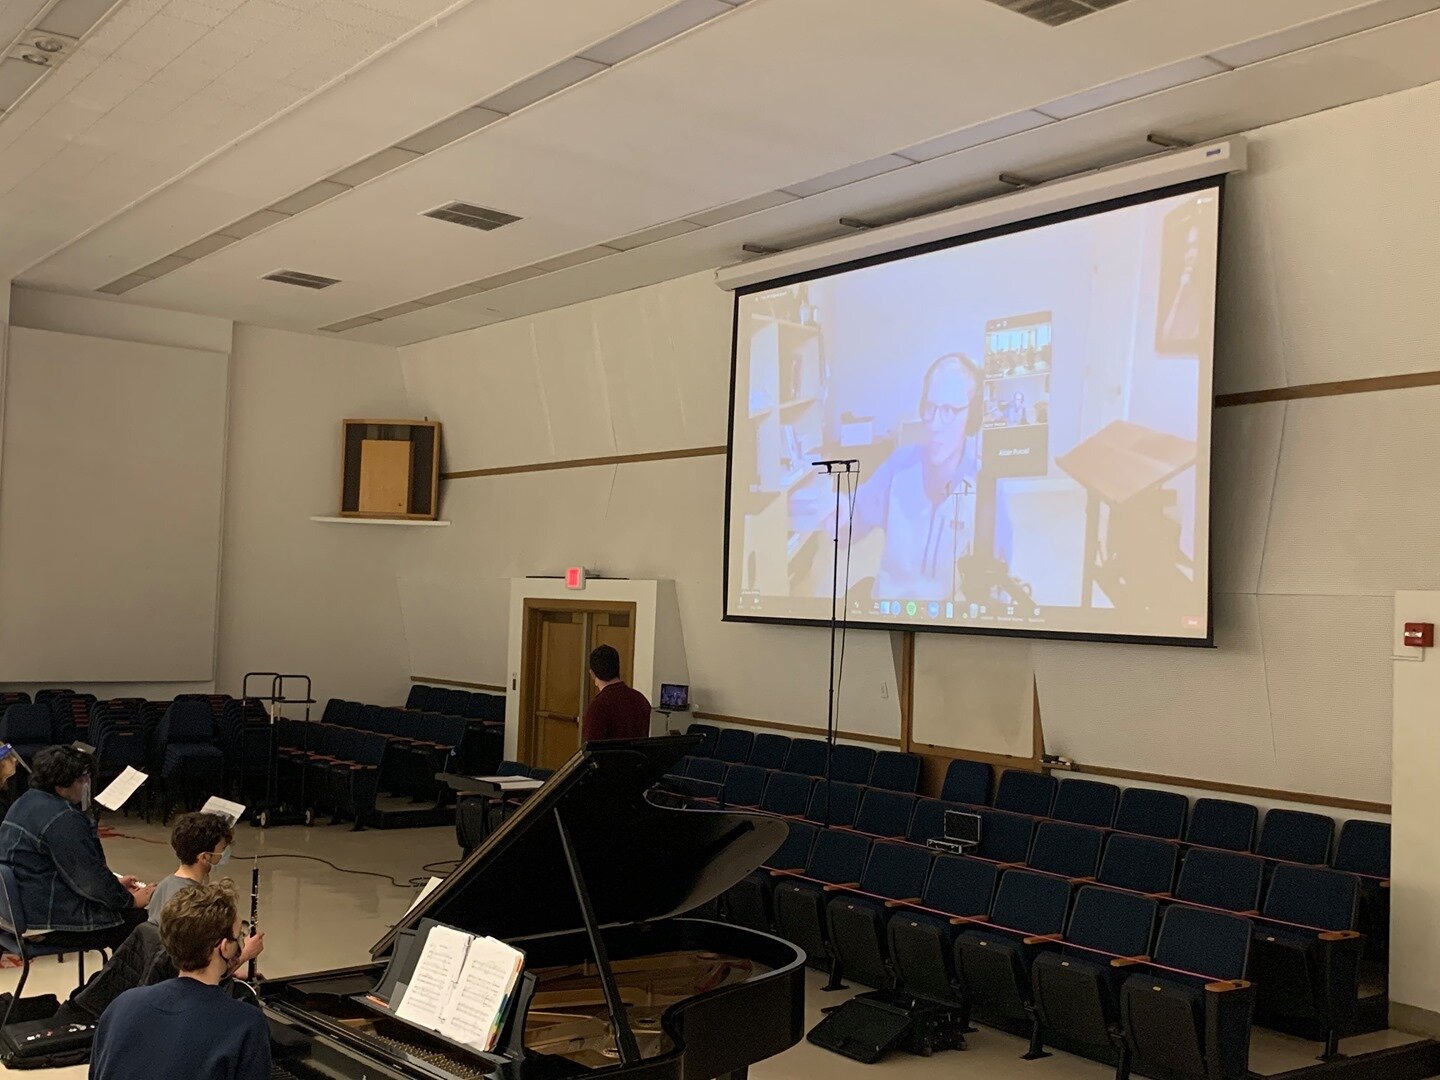 Last Thursday, composer Aaron Perrine &quot;zoomed&quot; in for the Hindsley Symphonic Band rehearsal of his &quot;Life Painting.&quot; Thank you to Aaron for sharing his time and music with us!

Aaron Perrine 
University of Illinois School of Music